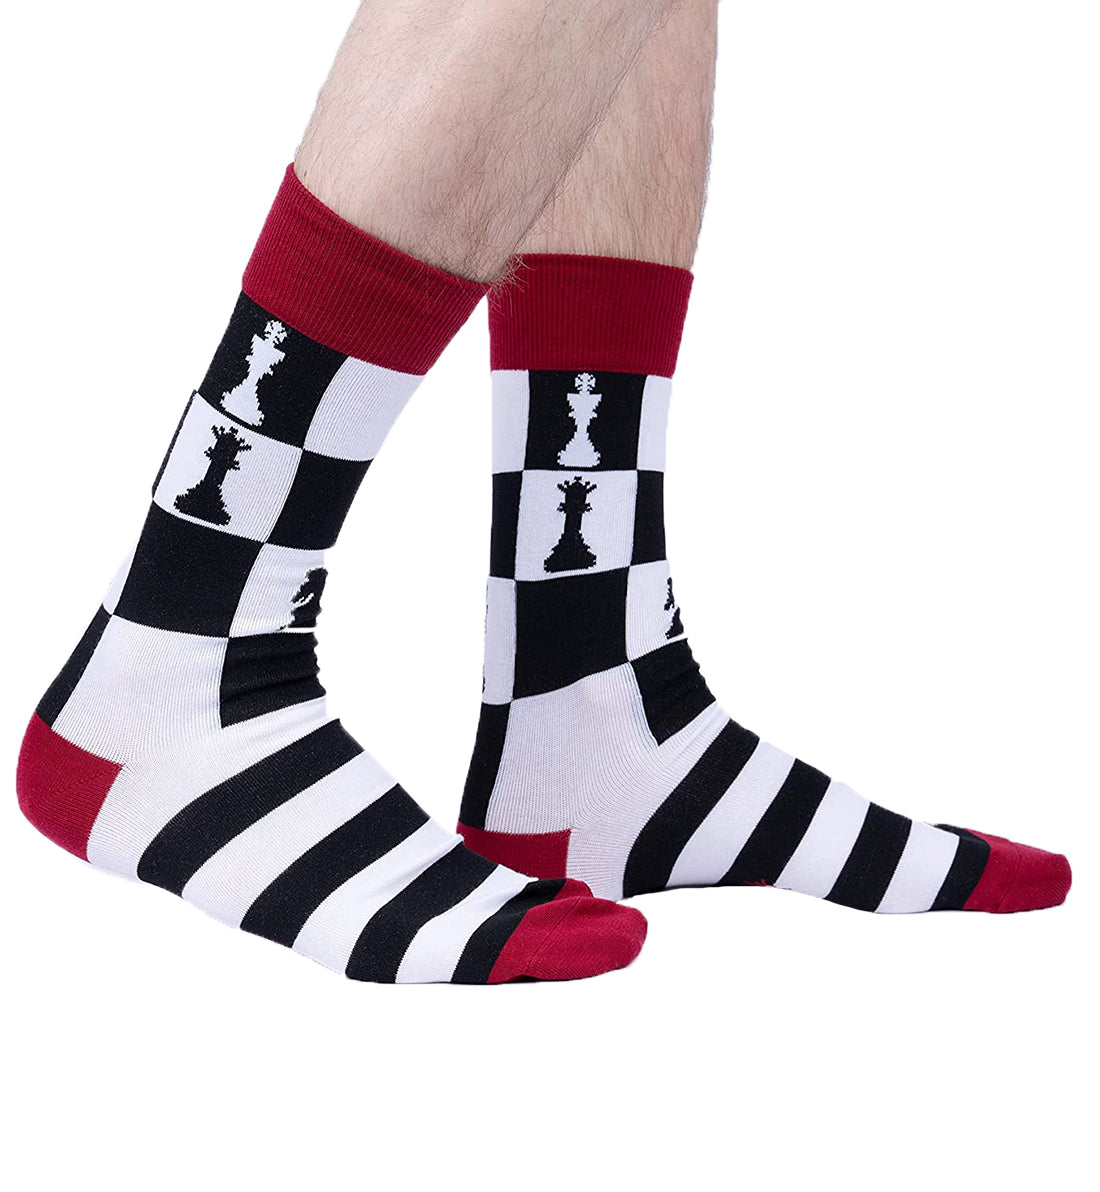 SOCK it to me Men&#39;s Crew Socks (MEF0597),Check Yeah - Check Yeah,One Size